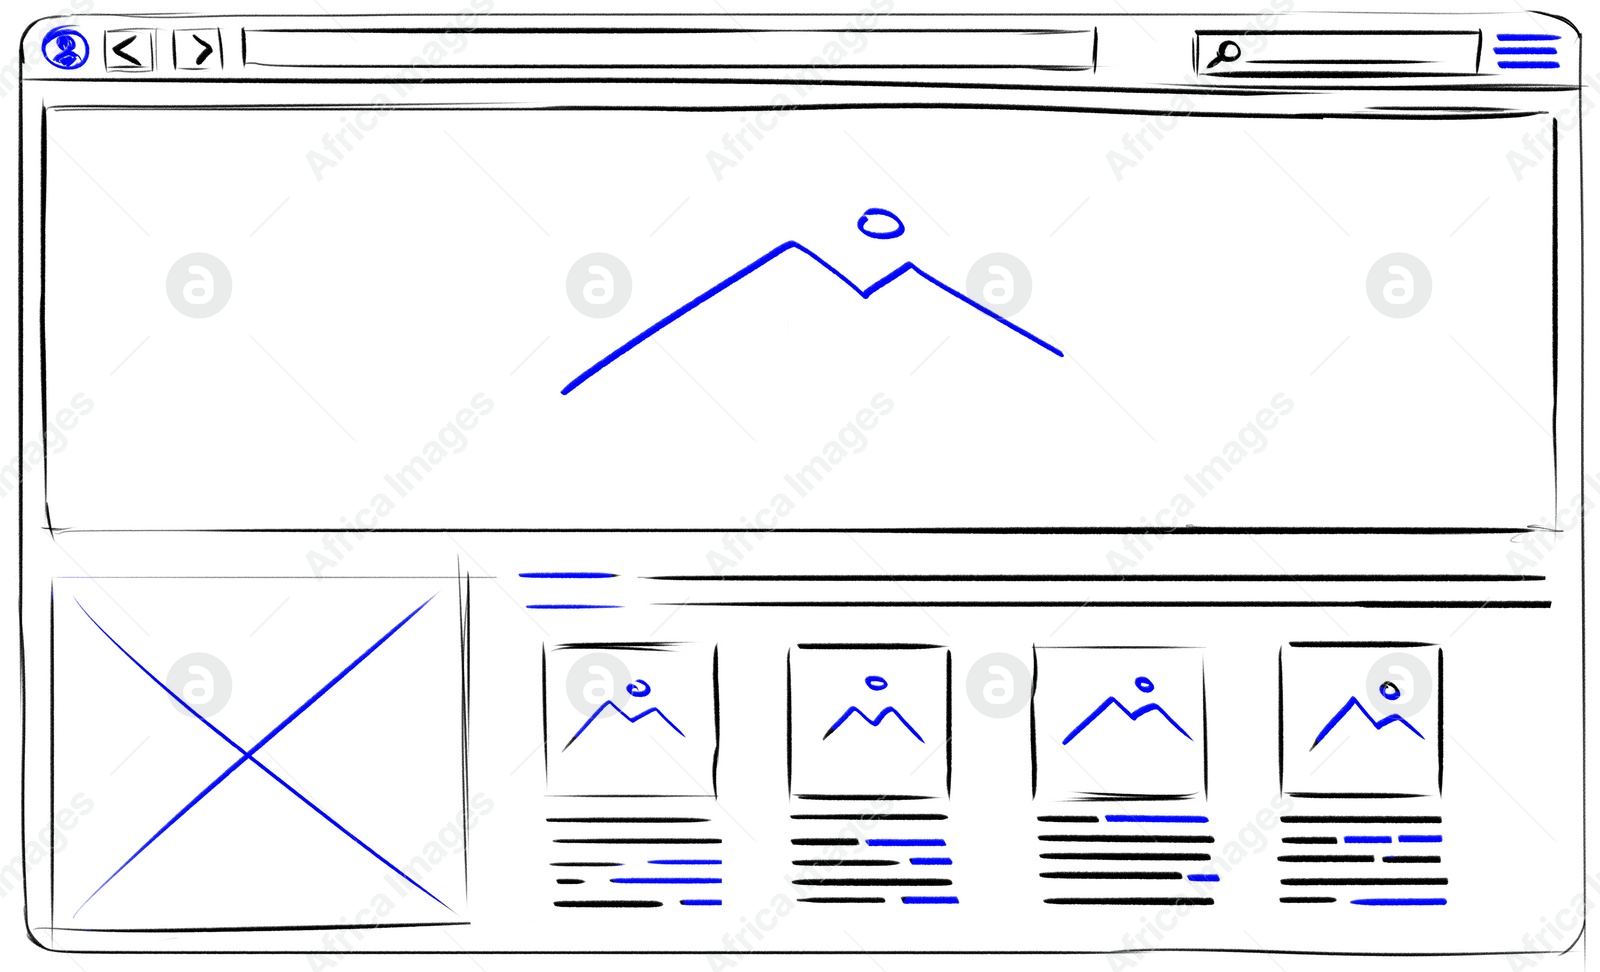 Image of Website design template. Wireframe with different elements on white background